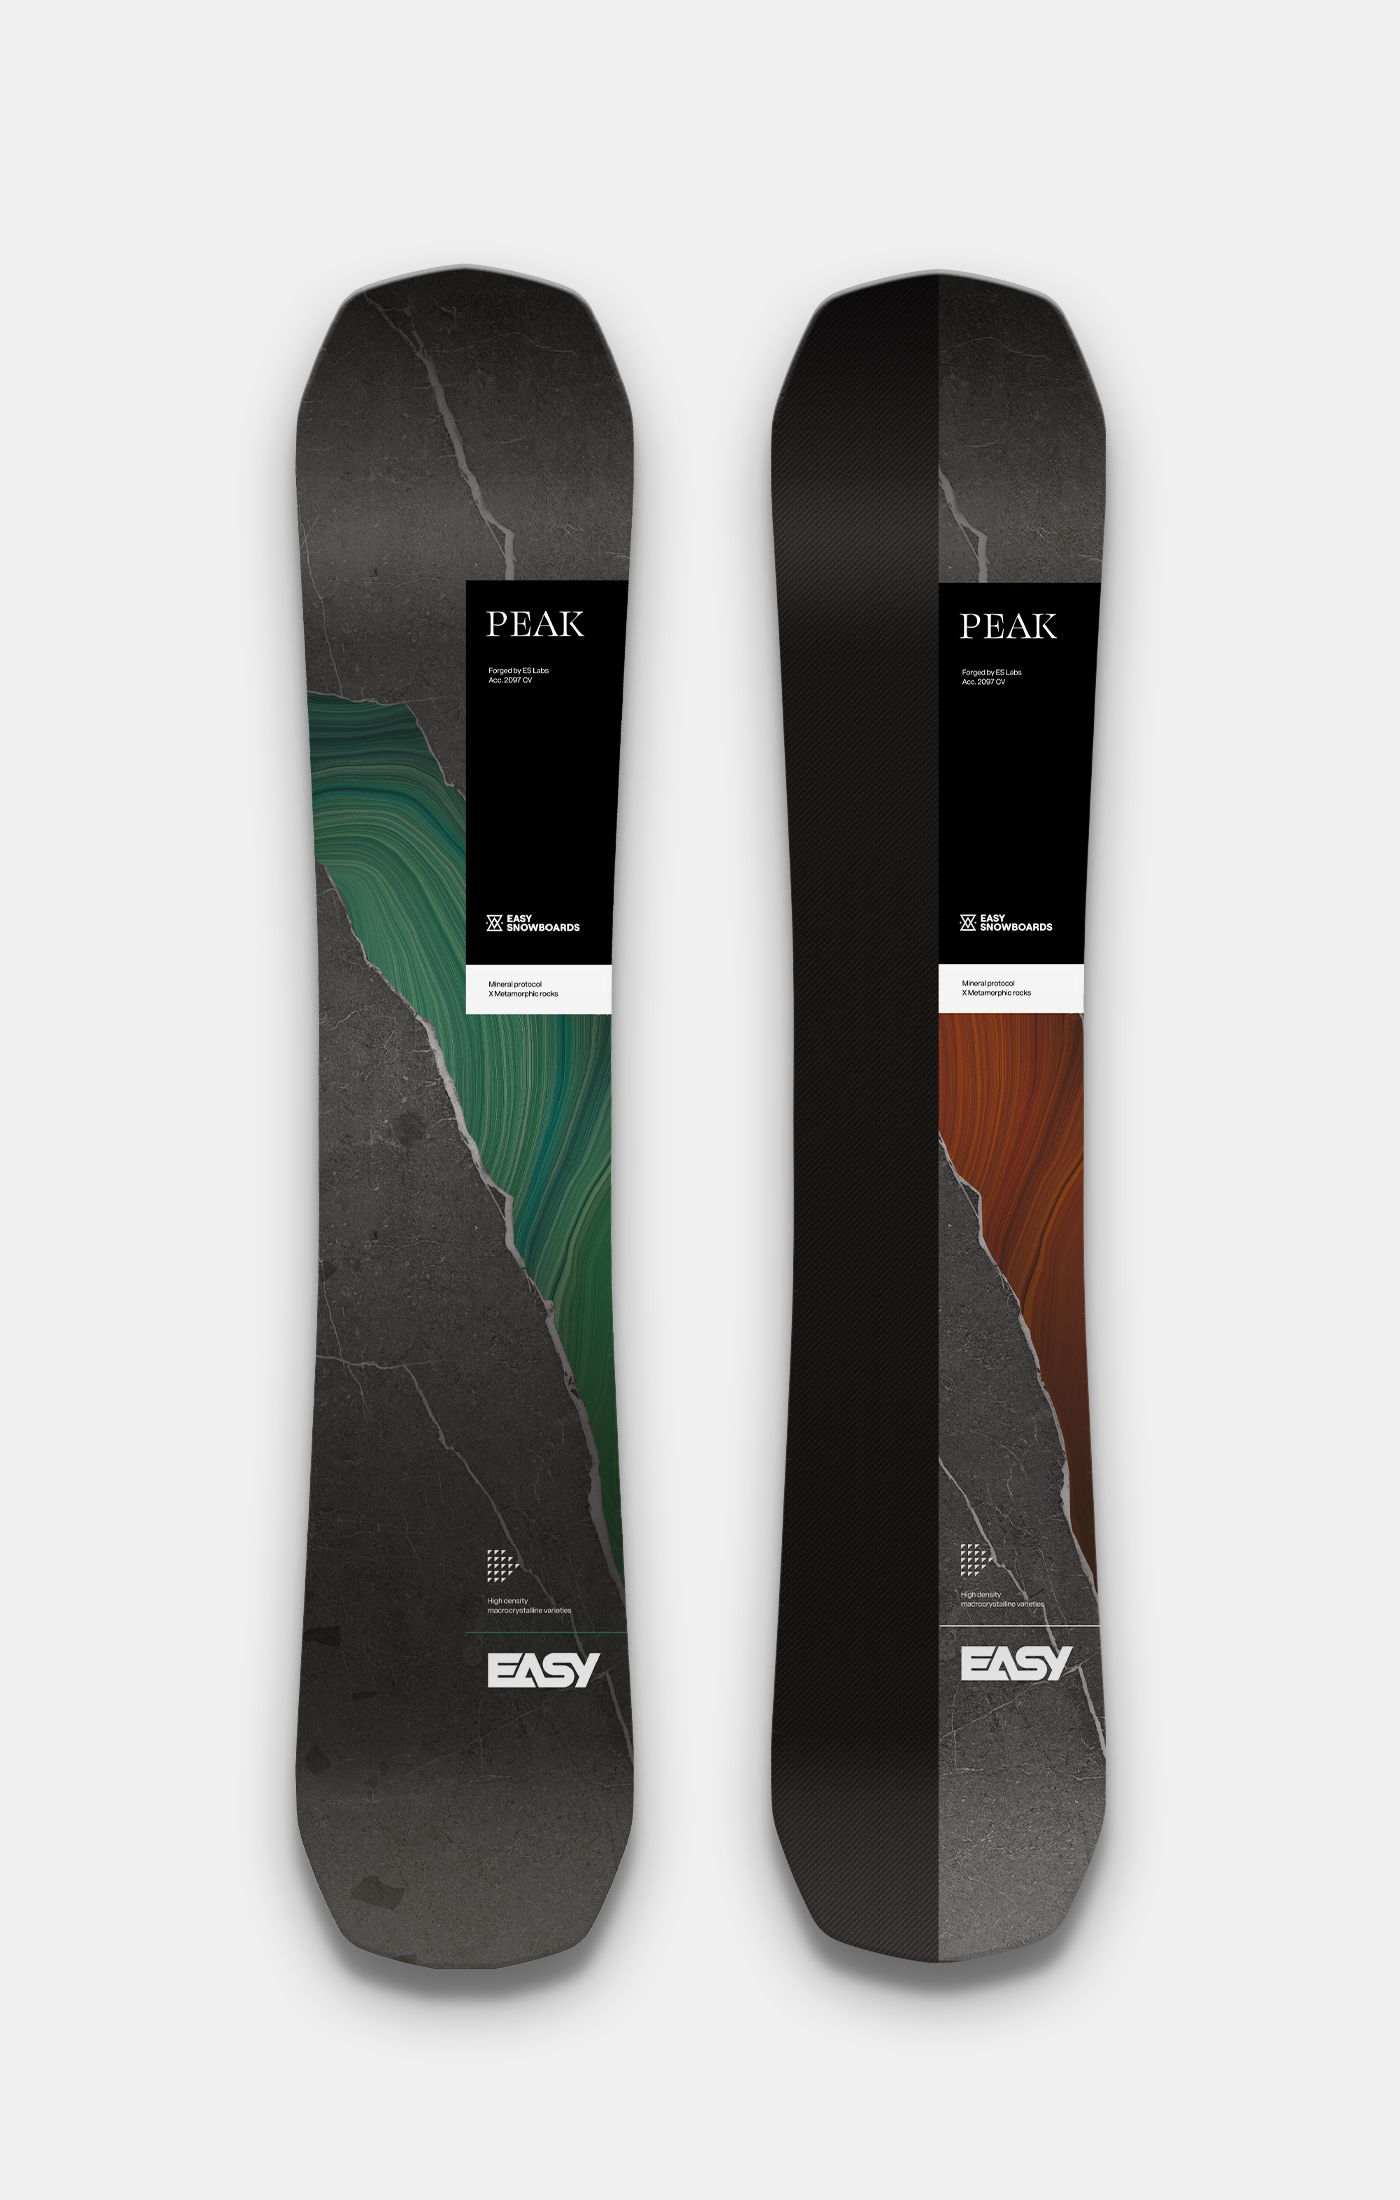 Easy snowboards 2022 - 2023 collection